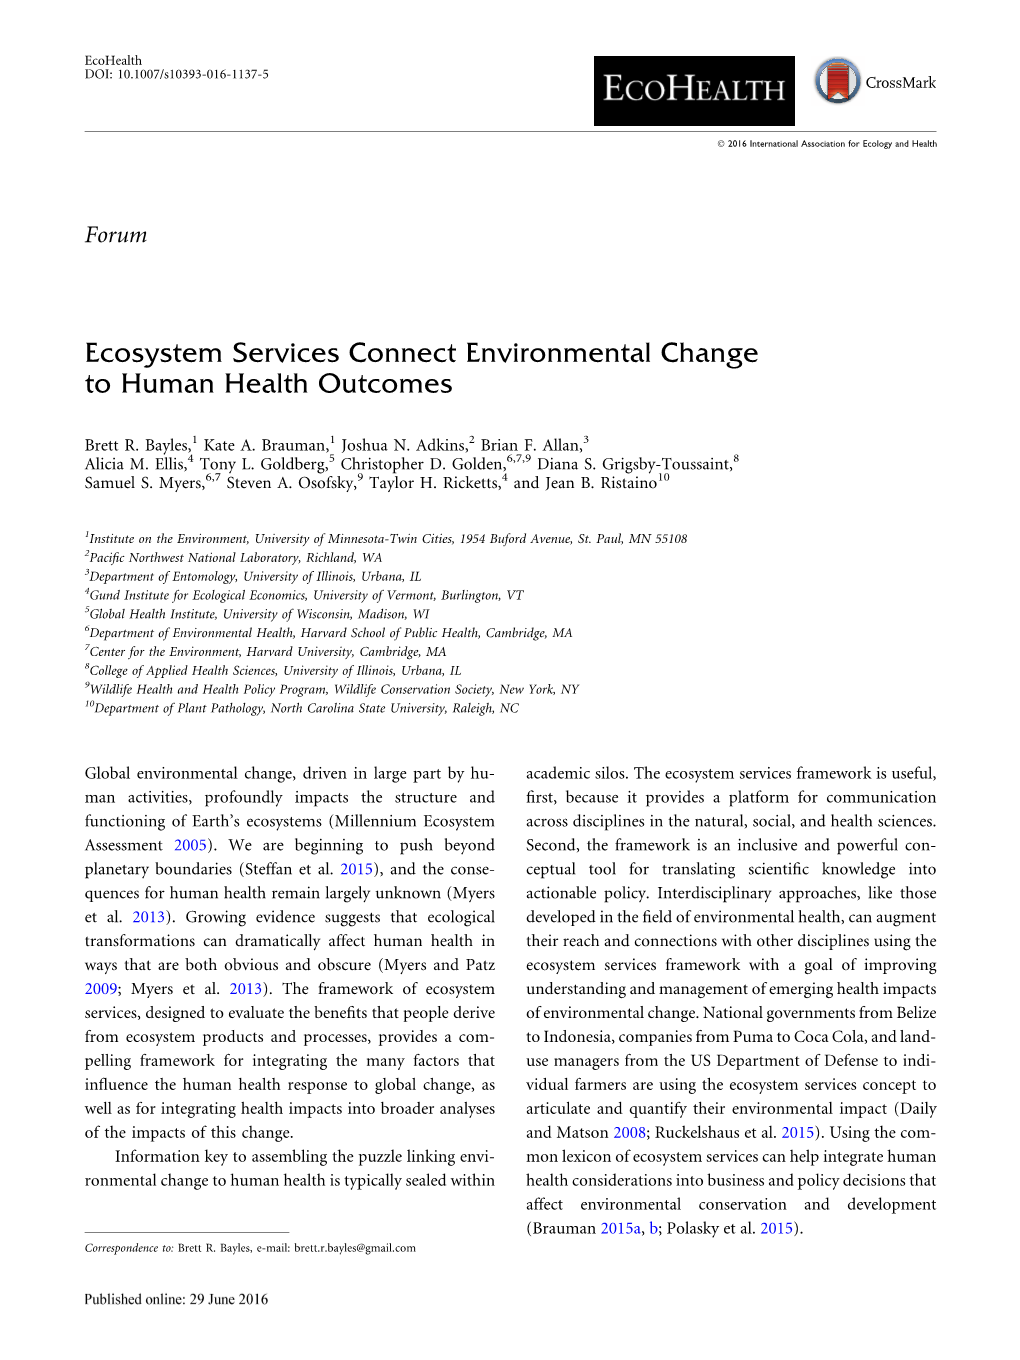 Ecosystem Services Connect Environmental Change to Human Health Outcomes